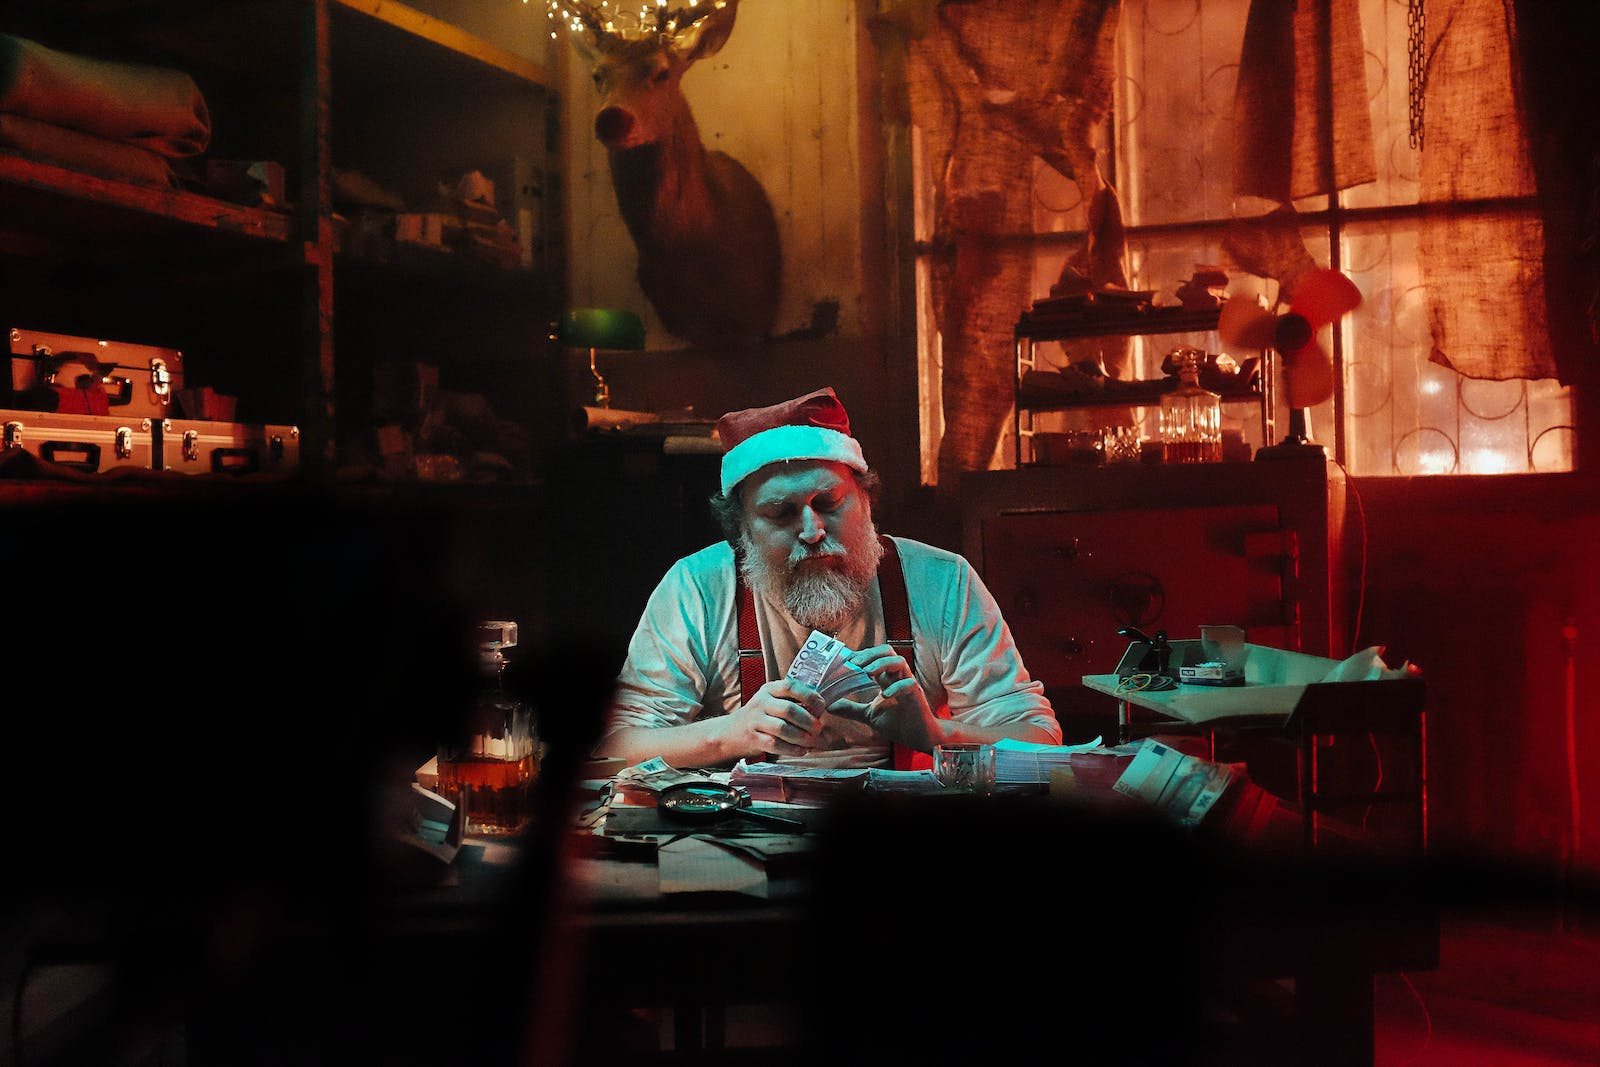 A Man Counting Money In A Dark Room, Representing Organized Crime And Money Laundering